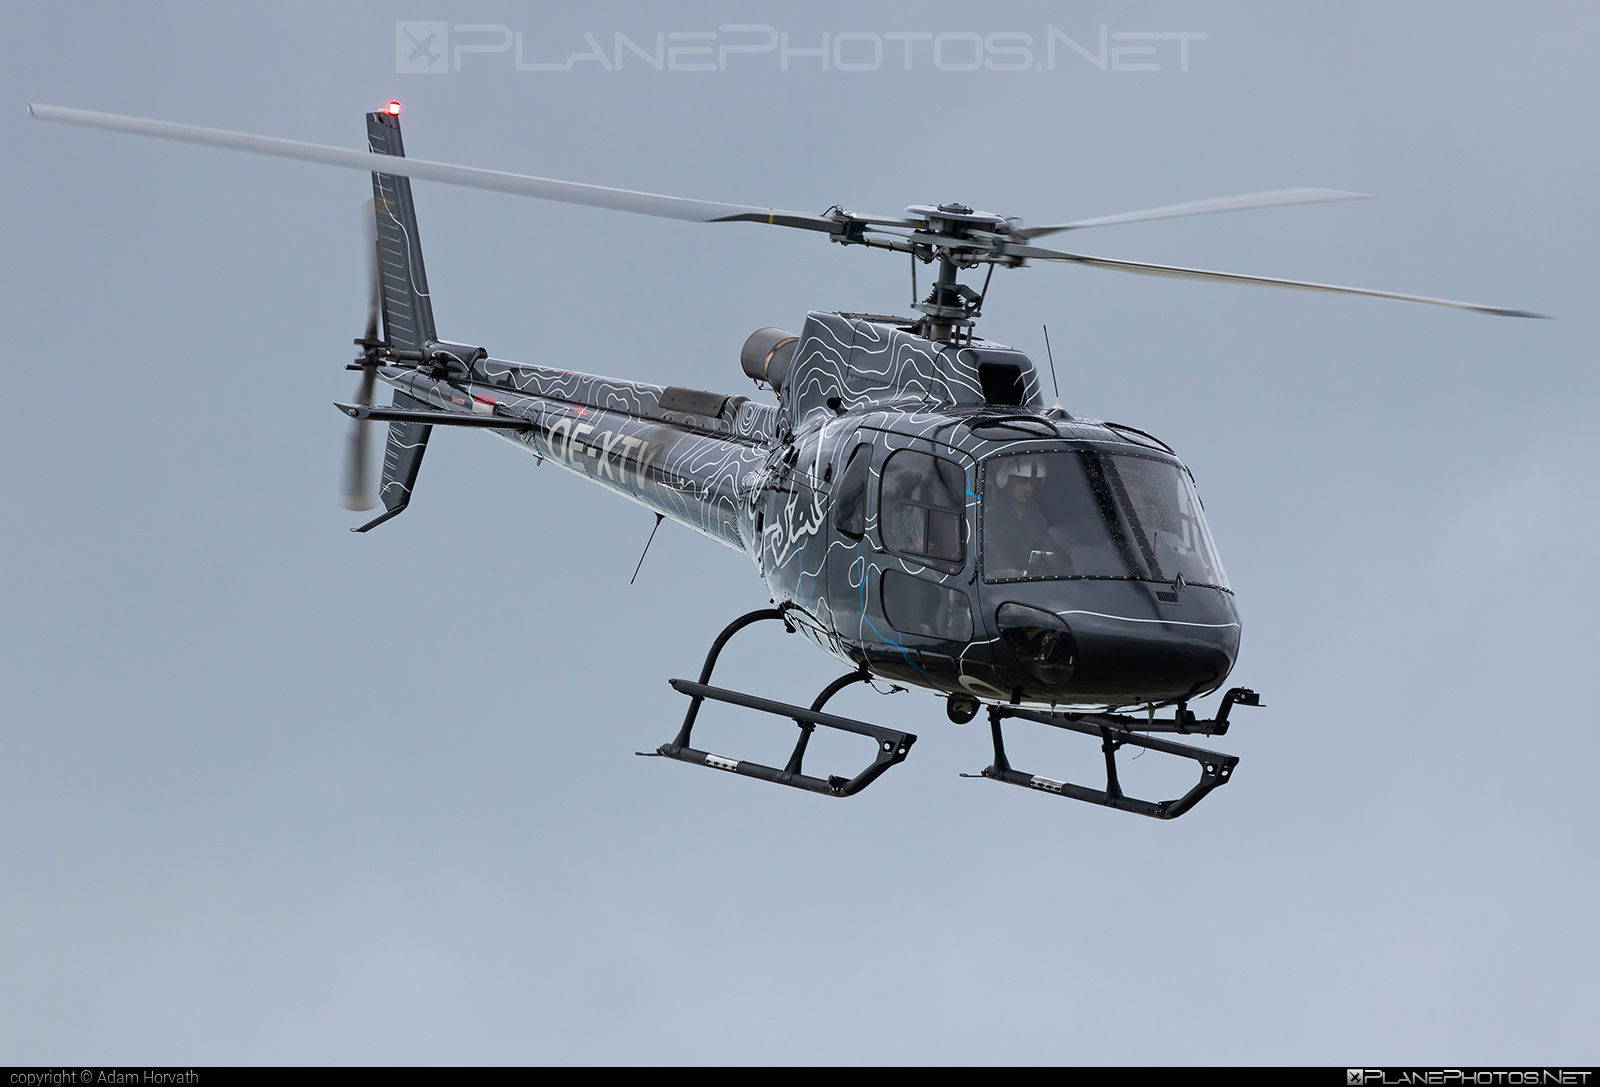 Eurocopter AS350 B3 Ecureuil - OE-XTV operated by The Flying Bulls #as350 #as350b3 #as350b3ecureuil #as350ecureuil #eurocopter #theflyingbulls